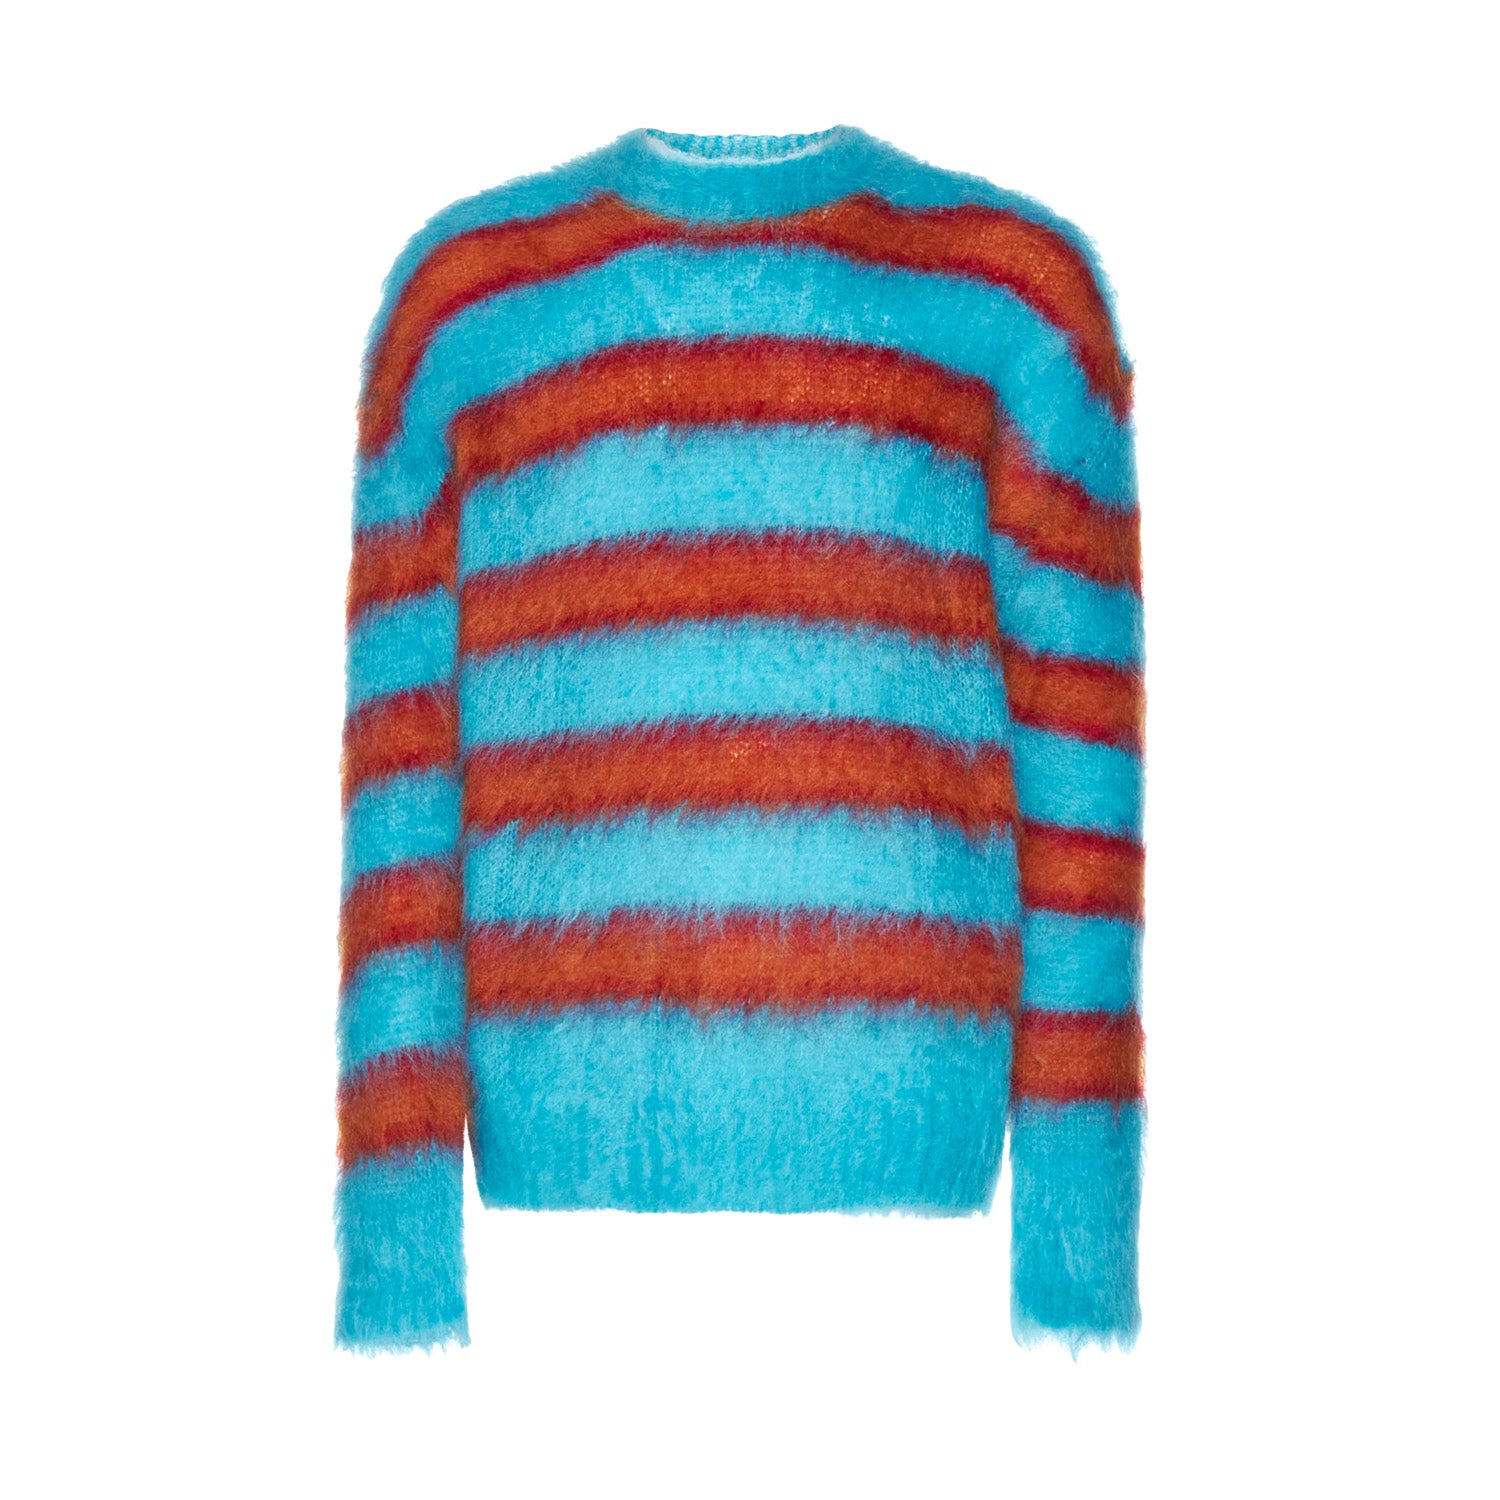 Fuzzy Wuzzy Brushed Mohair Sweater (Turquoise)